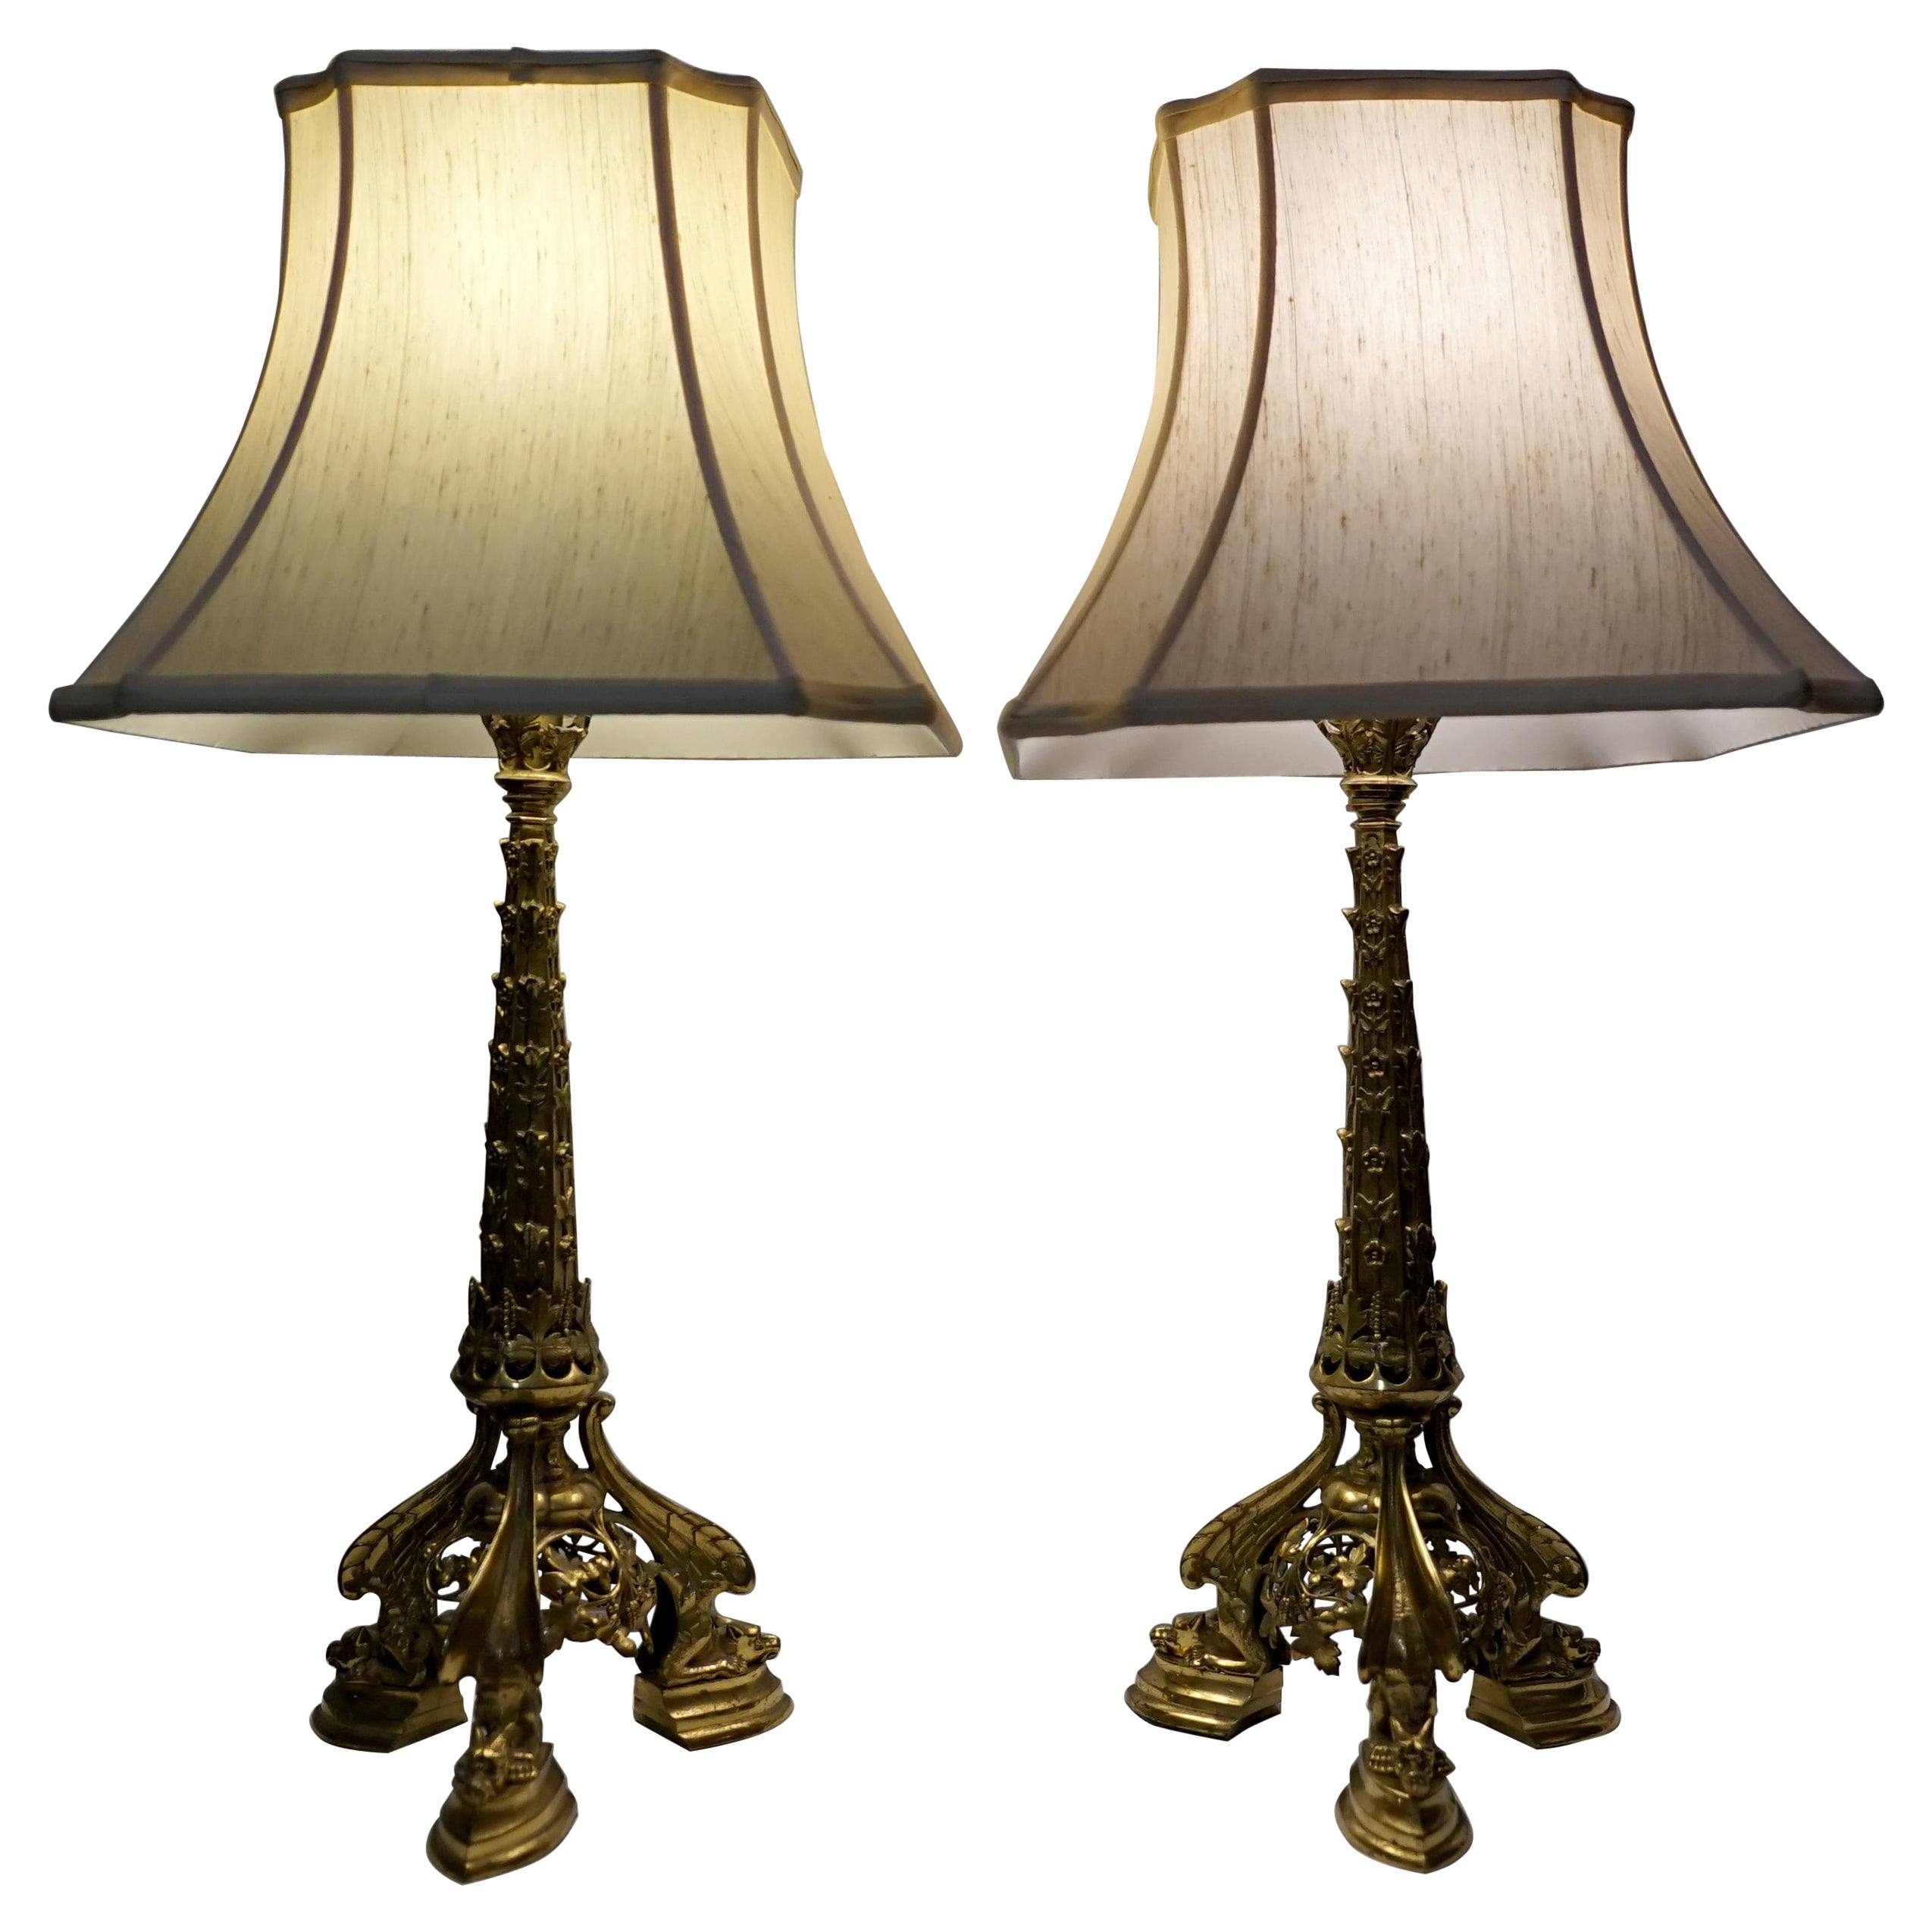 Pair of Cast Gilt Gargoyle Tower Bronze or Brass Table Lamps with Shades